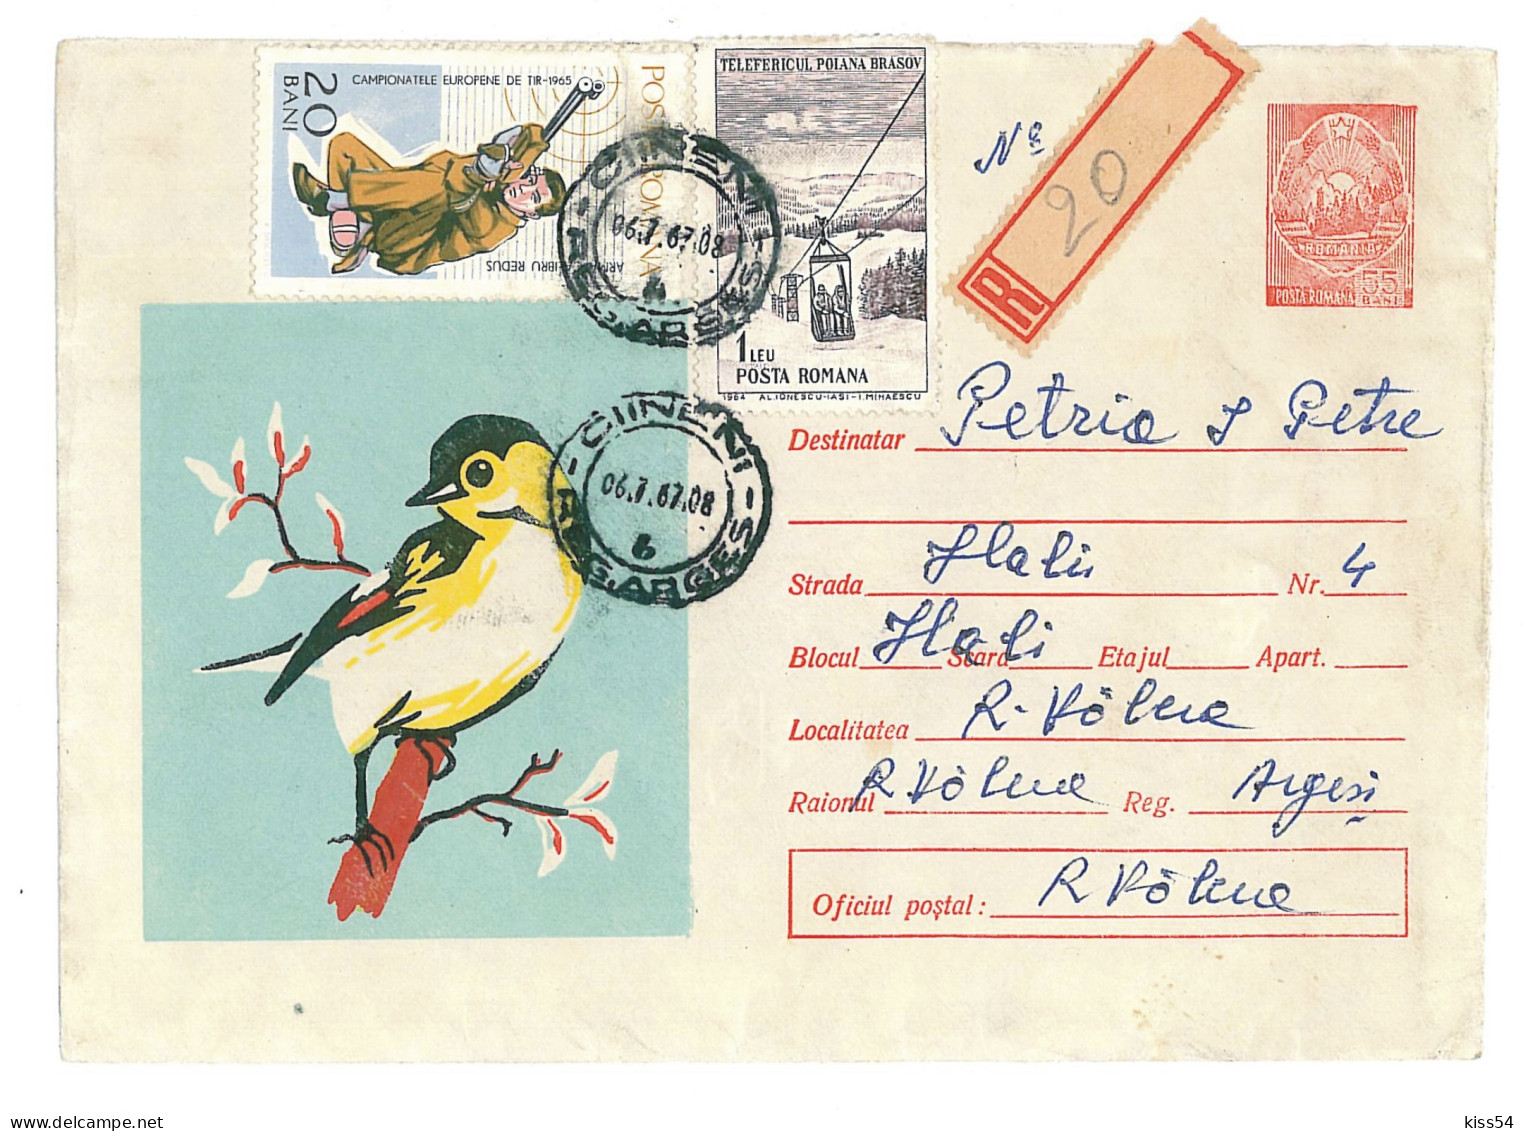 IP 67 - 035 BIRD, Titmouse, Romania - Registered Stationery - Used - 1967 - Entiers Postaux